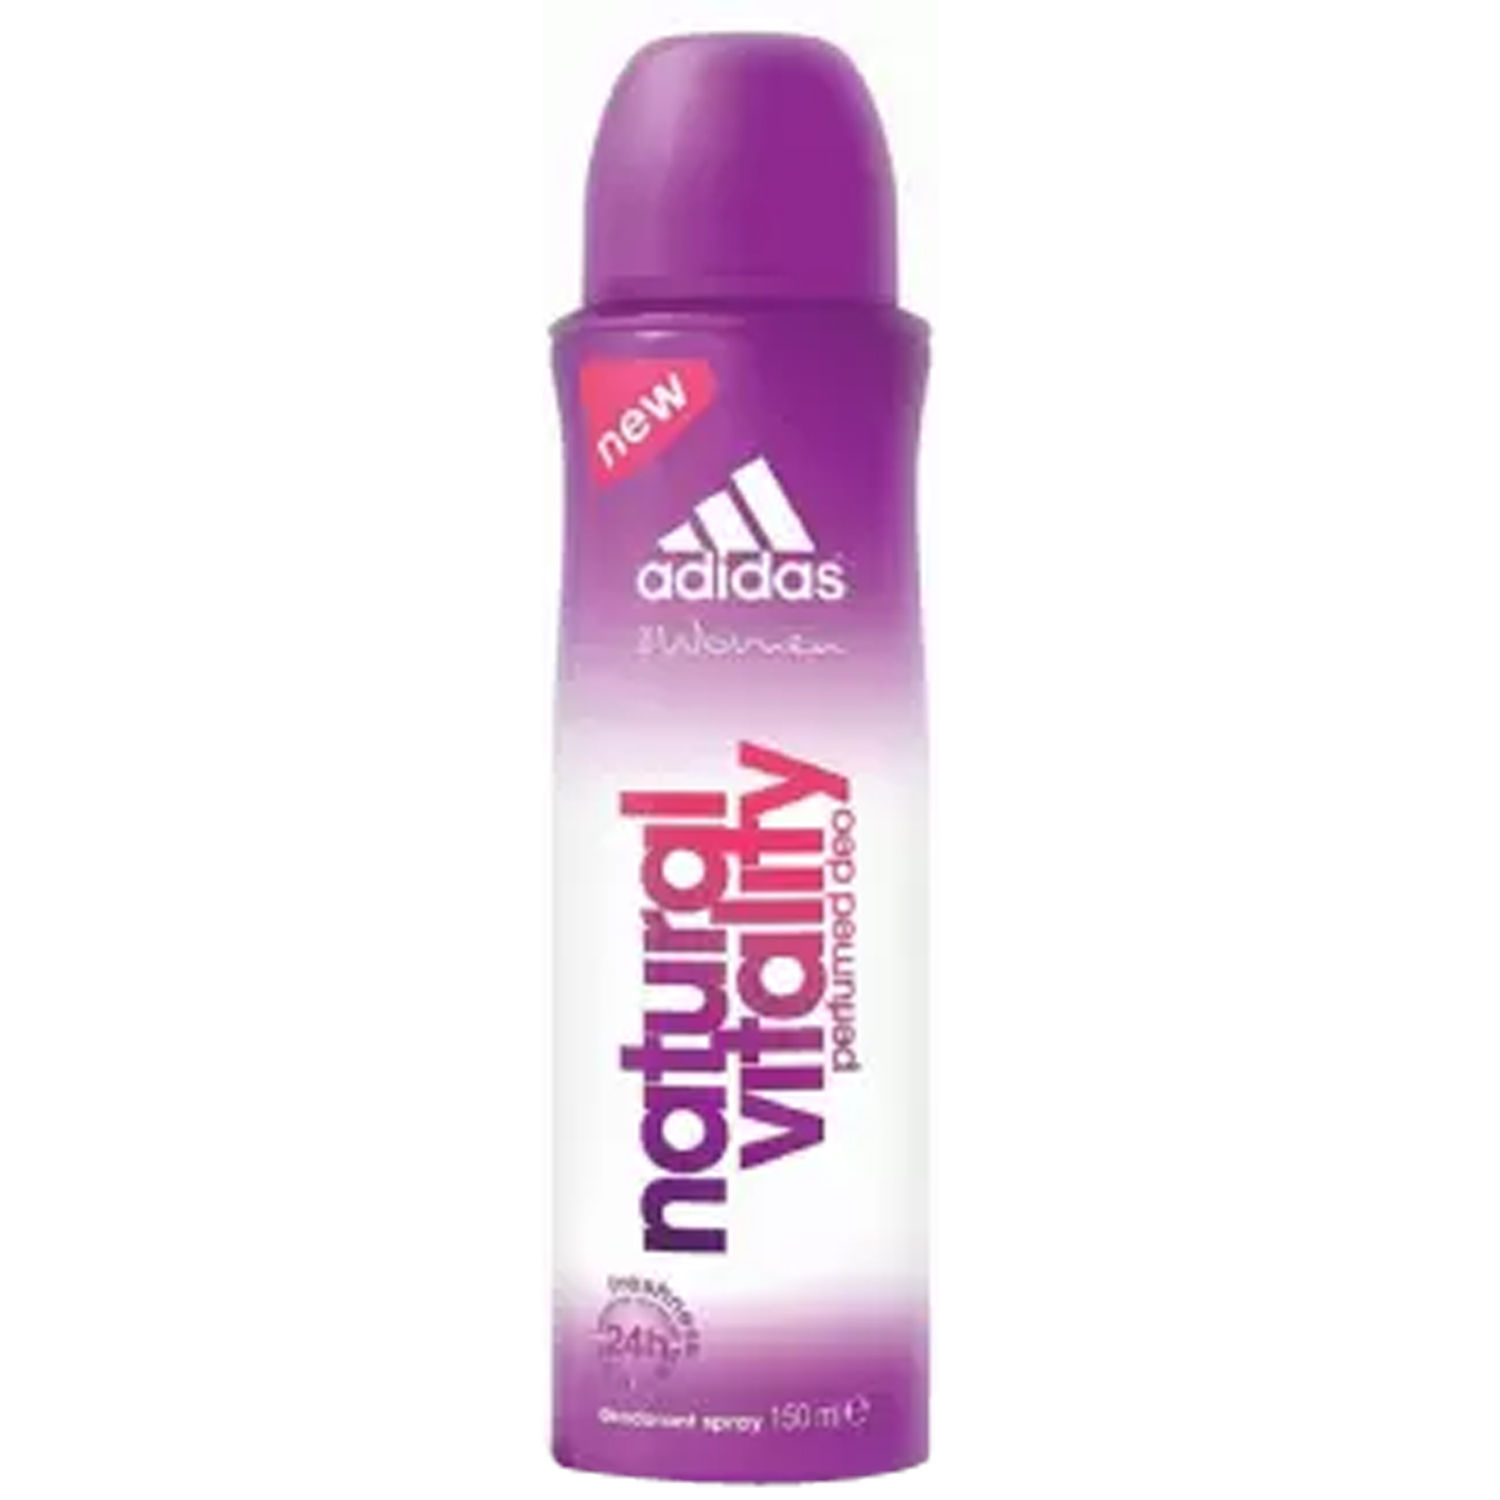 Adidas Natural Vitality Perfumed Deodorant Body Spray For Women, 150 ml, Pack of 1 